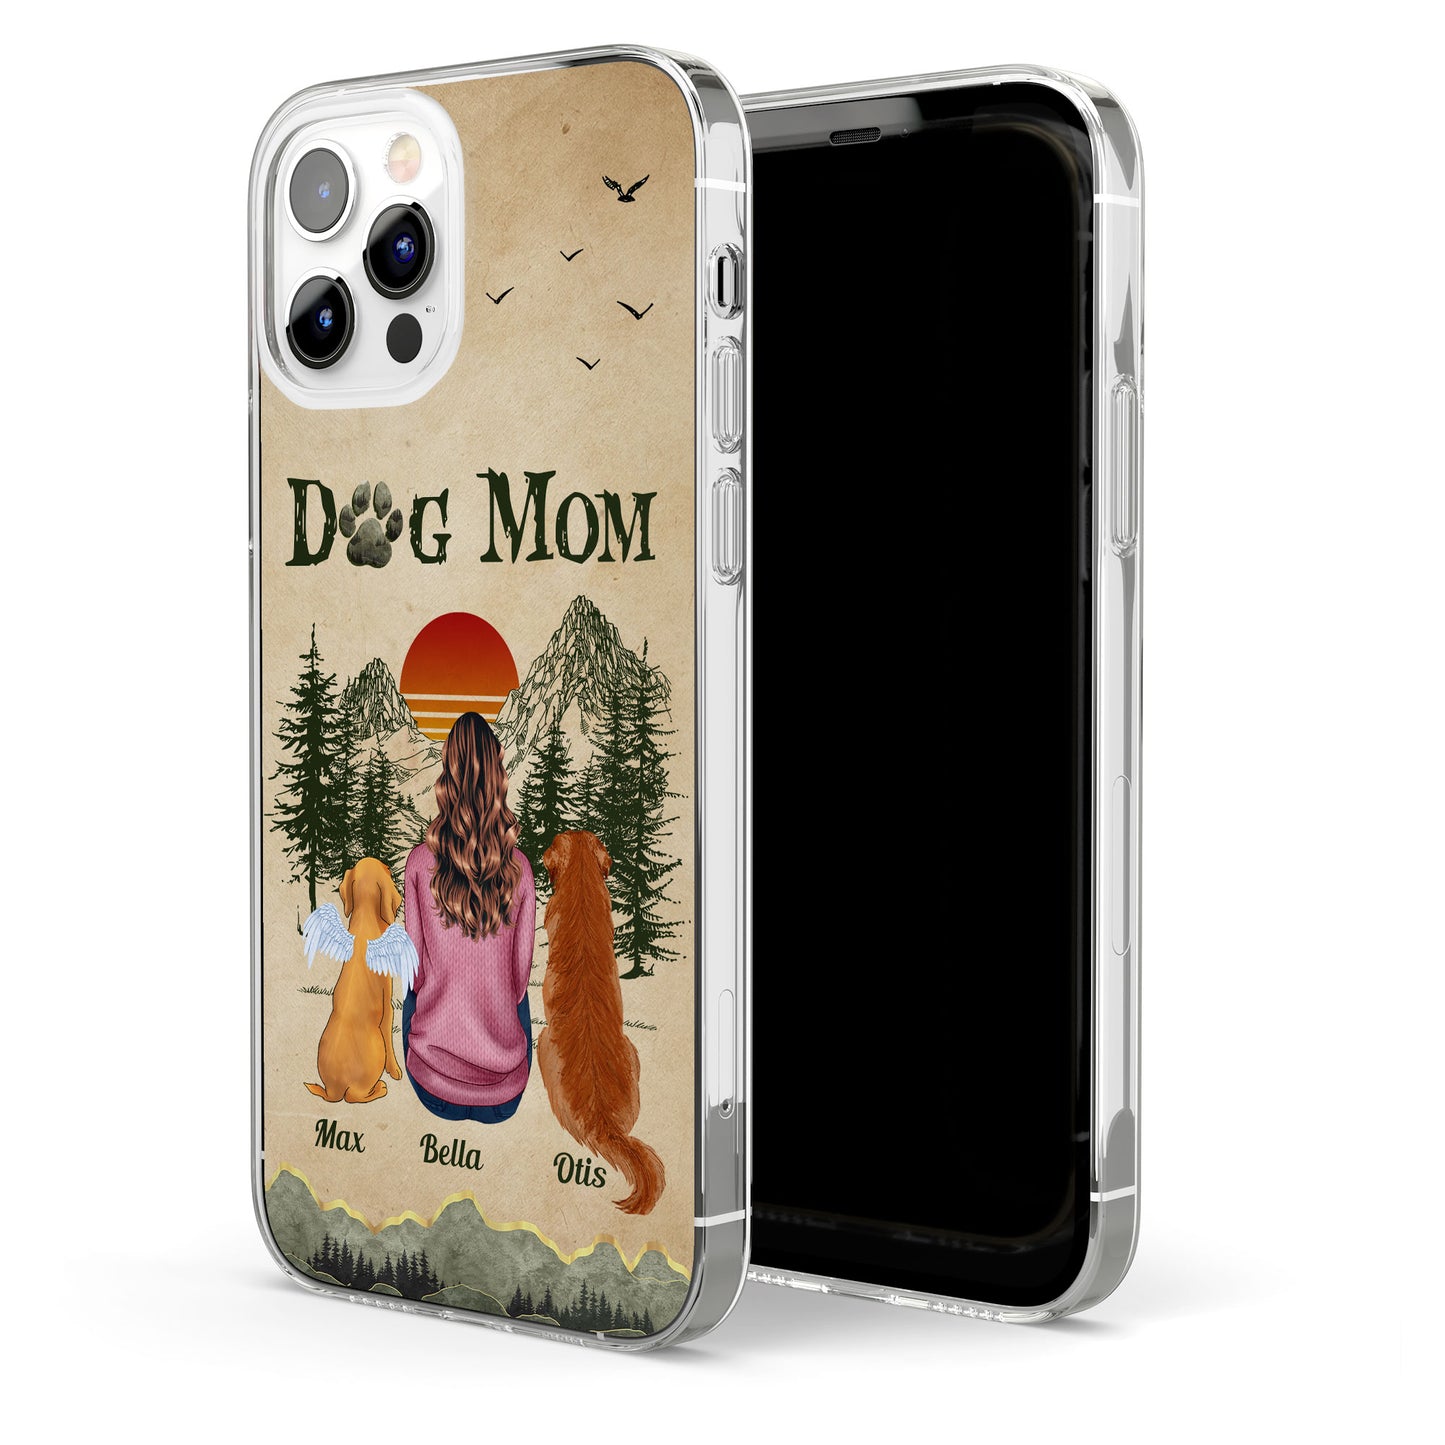 A Girl And Her Dogs Unbreakable Bond - Personalized Clear Phone Case